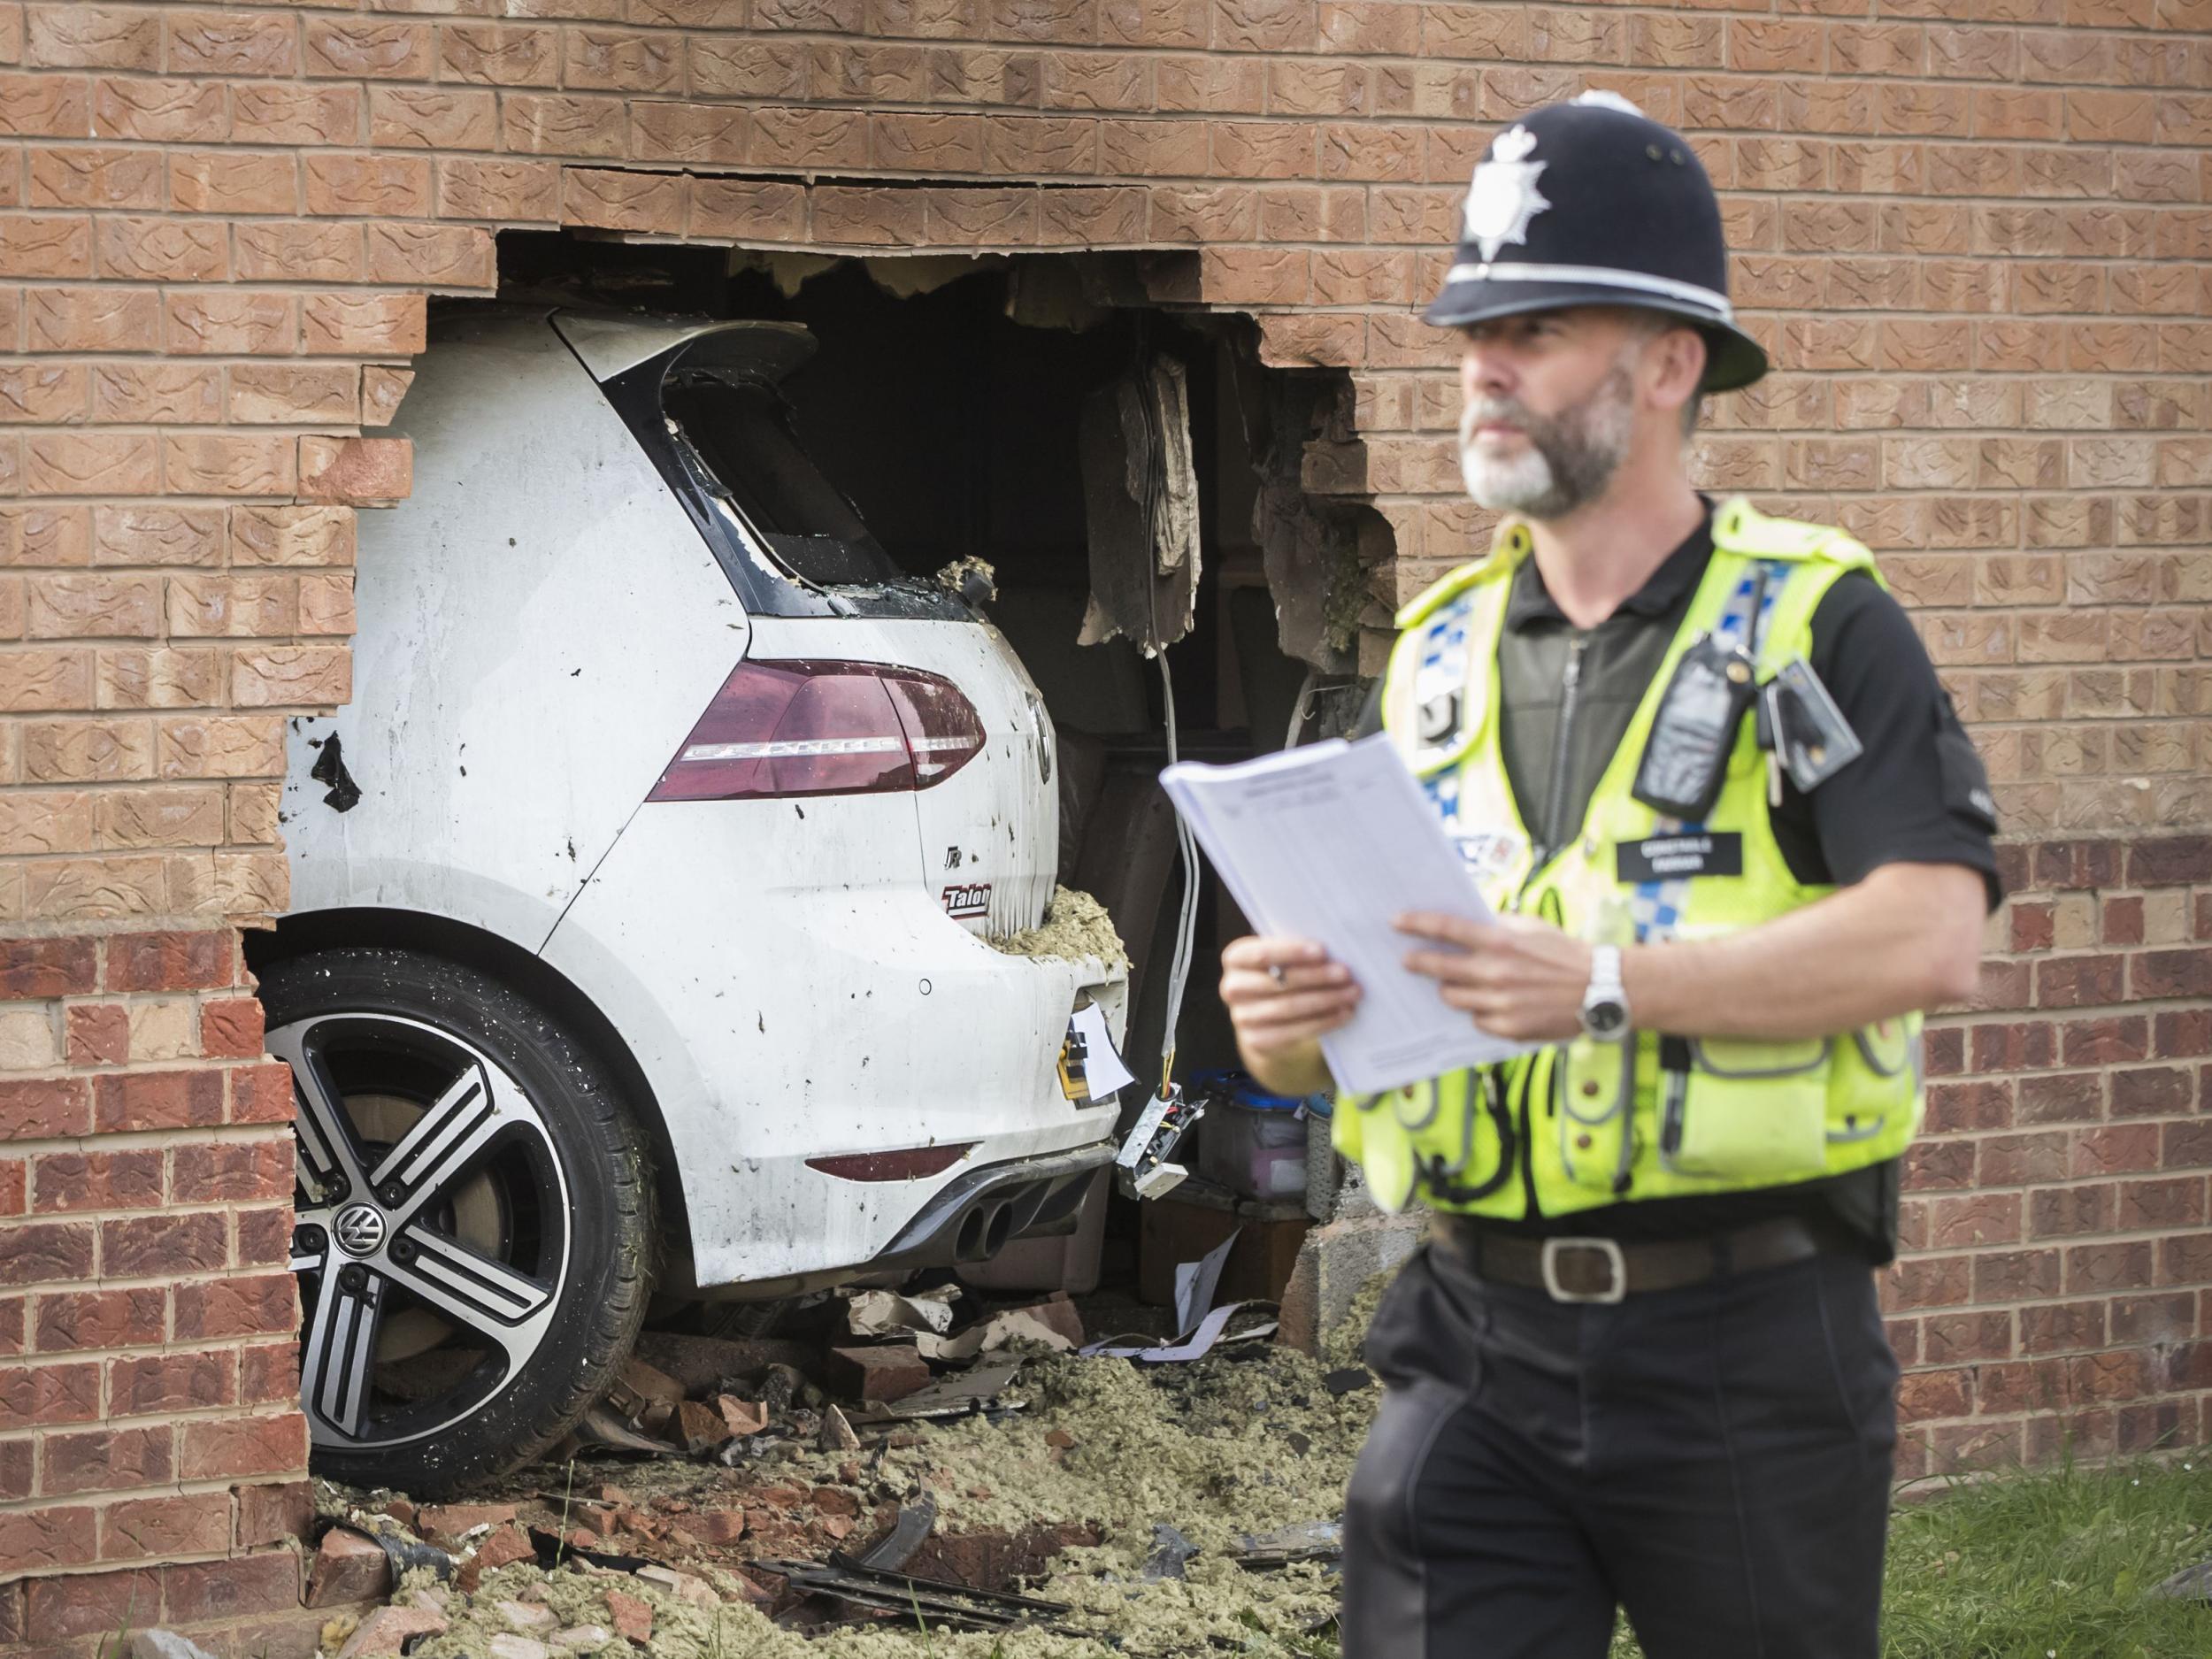 The scene in Morehall Close, Clifton, York, after a Volkswagen Golf R left the road and hit a house where a man inside the property suffered serious injuries, although they are not believed to be life threatening, PRESS ASSOCIATION Photo. Picture date: Sunday September 3, 2017.